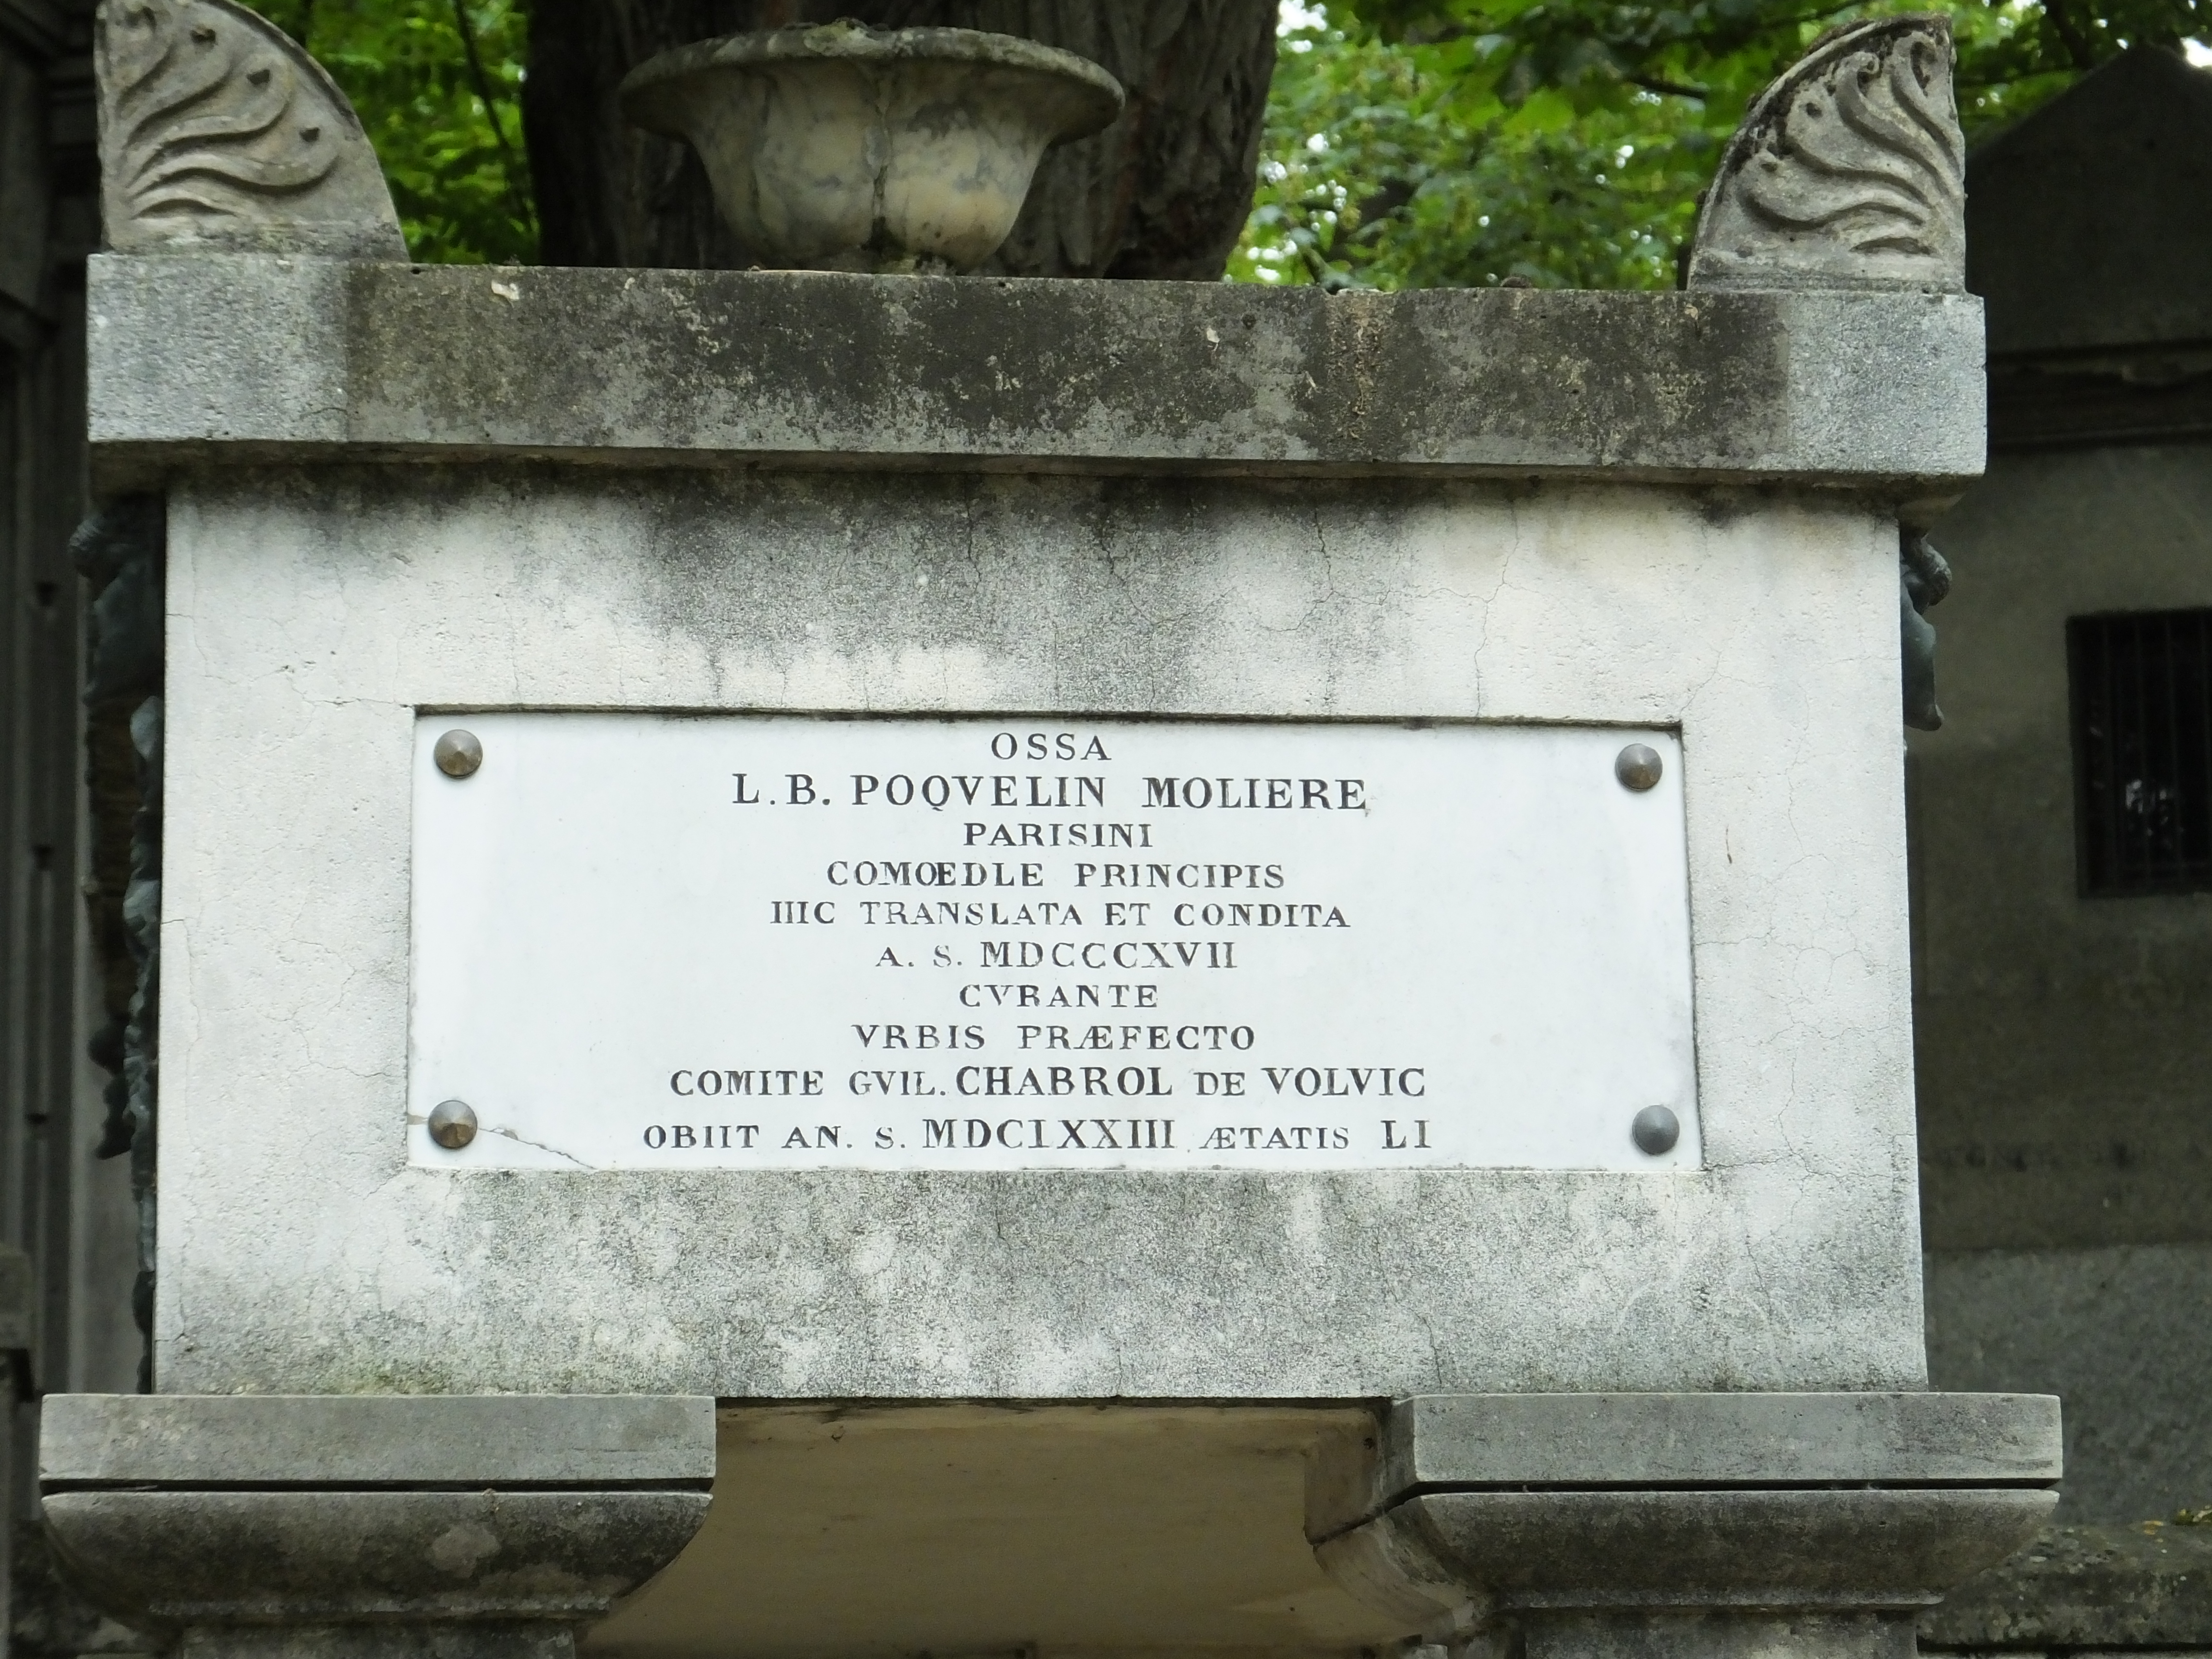 Moliere's grave, famous in French literature